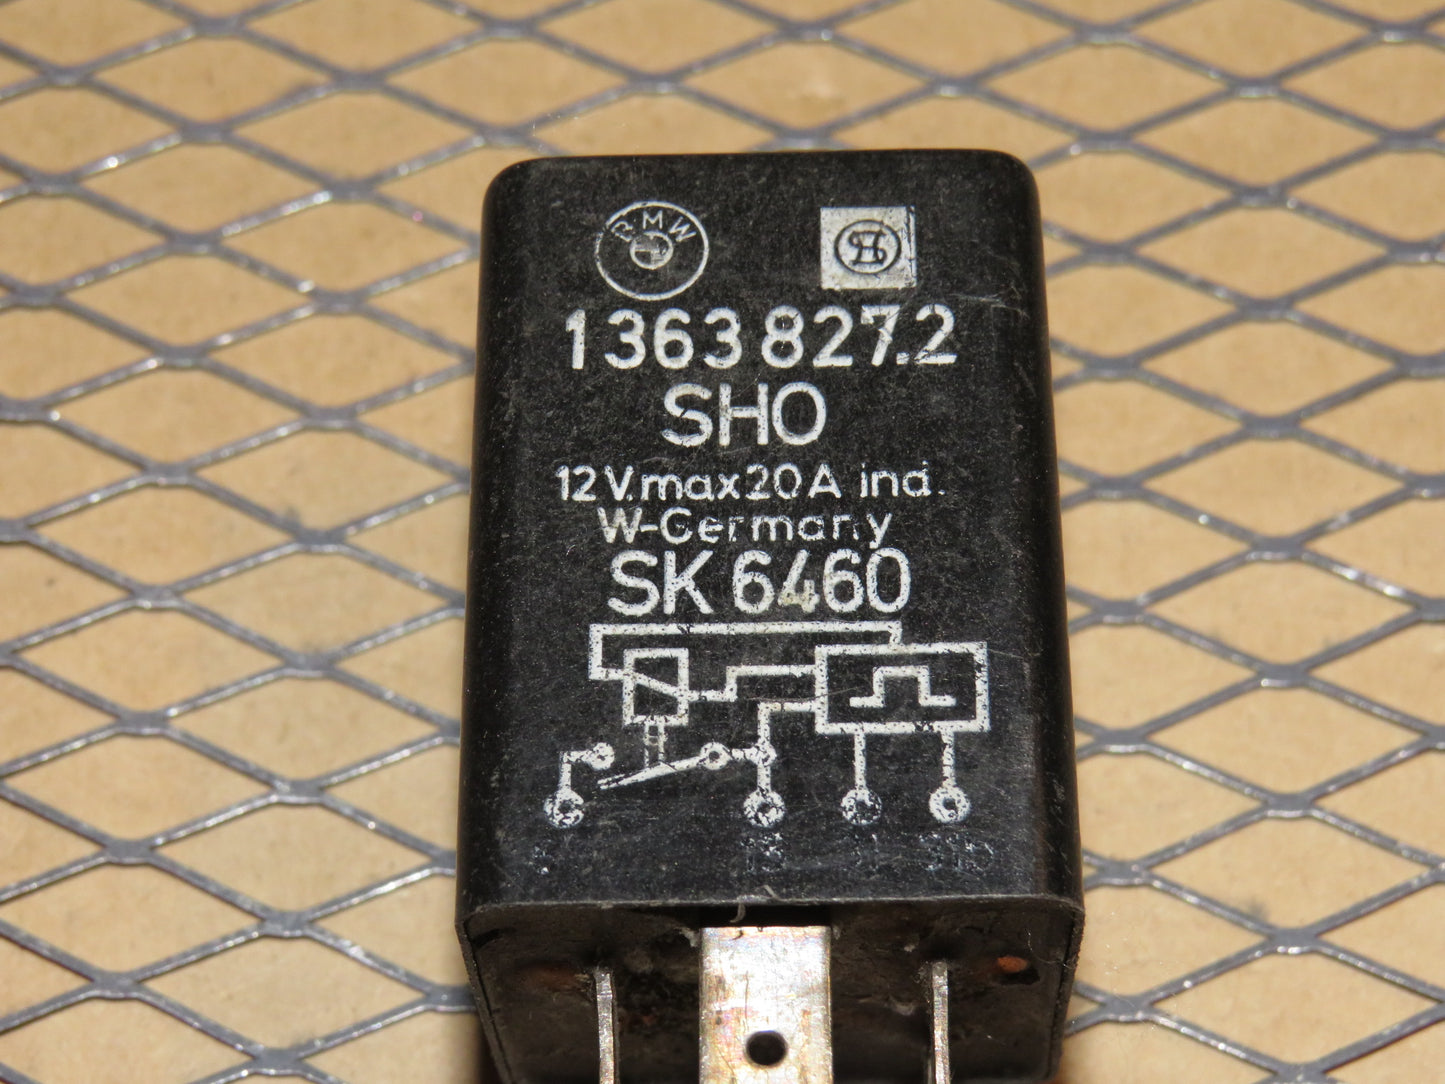 BMW Relay 1363 827.2 / SK 6460